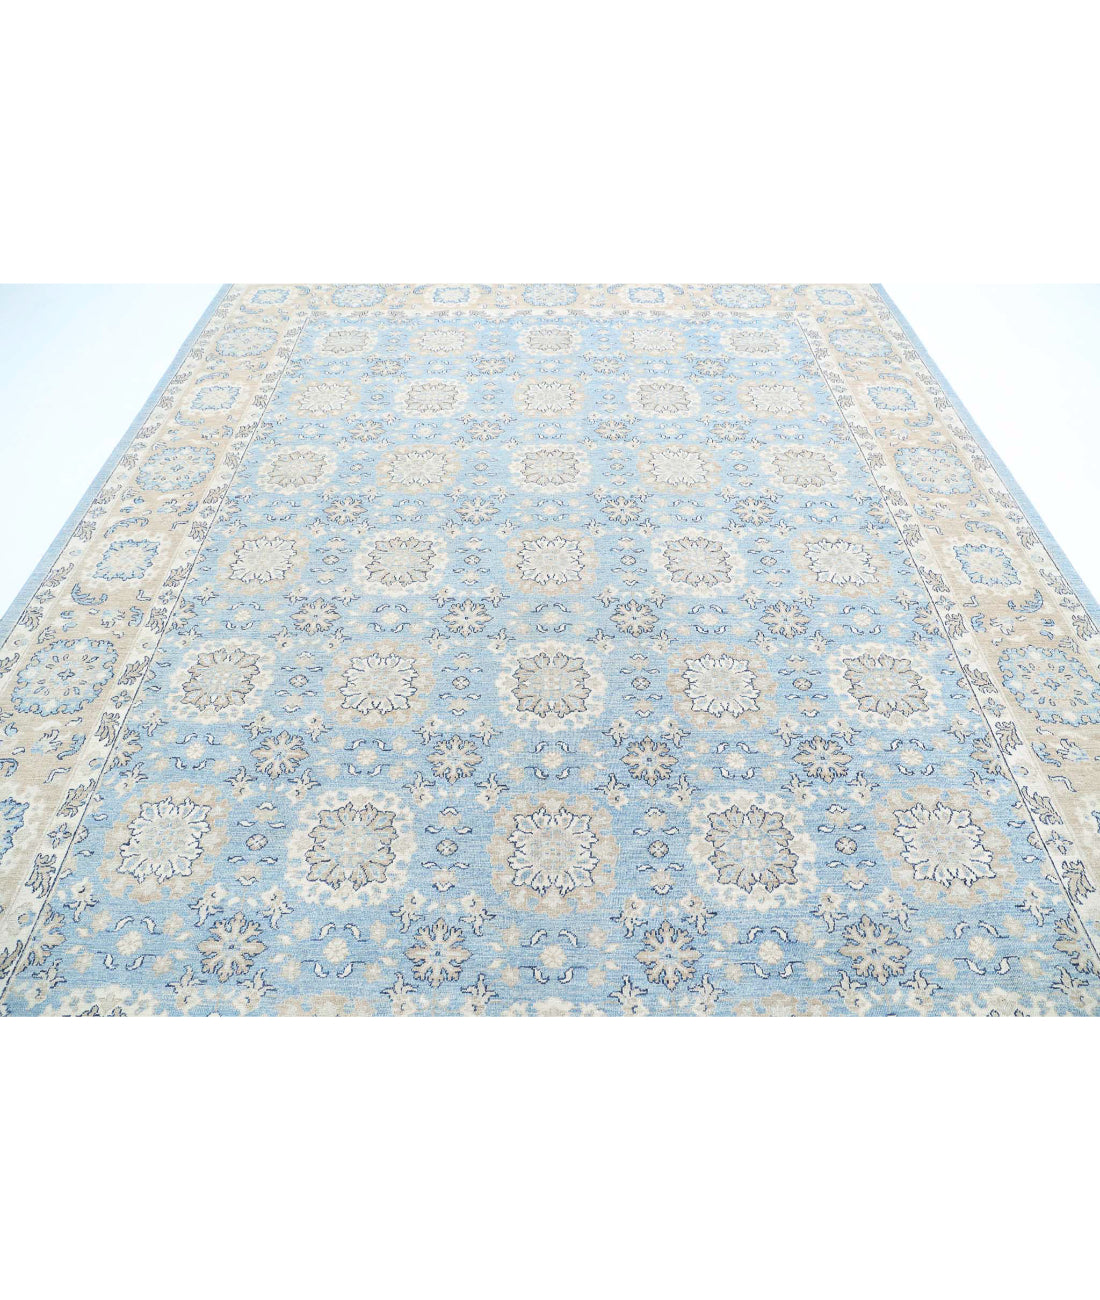 Hand Knotted Serenity Wool Rug - 8'10'' x 11'9'' 8'10'' x 11'9'' (265 X 353) / Blue / Taupe